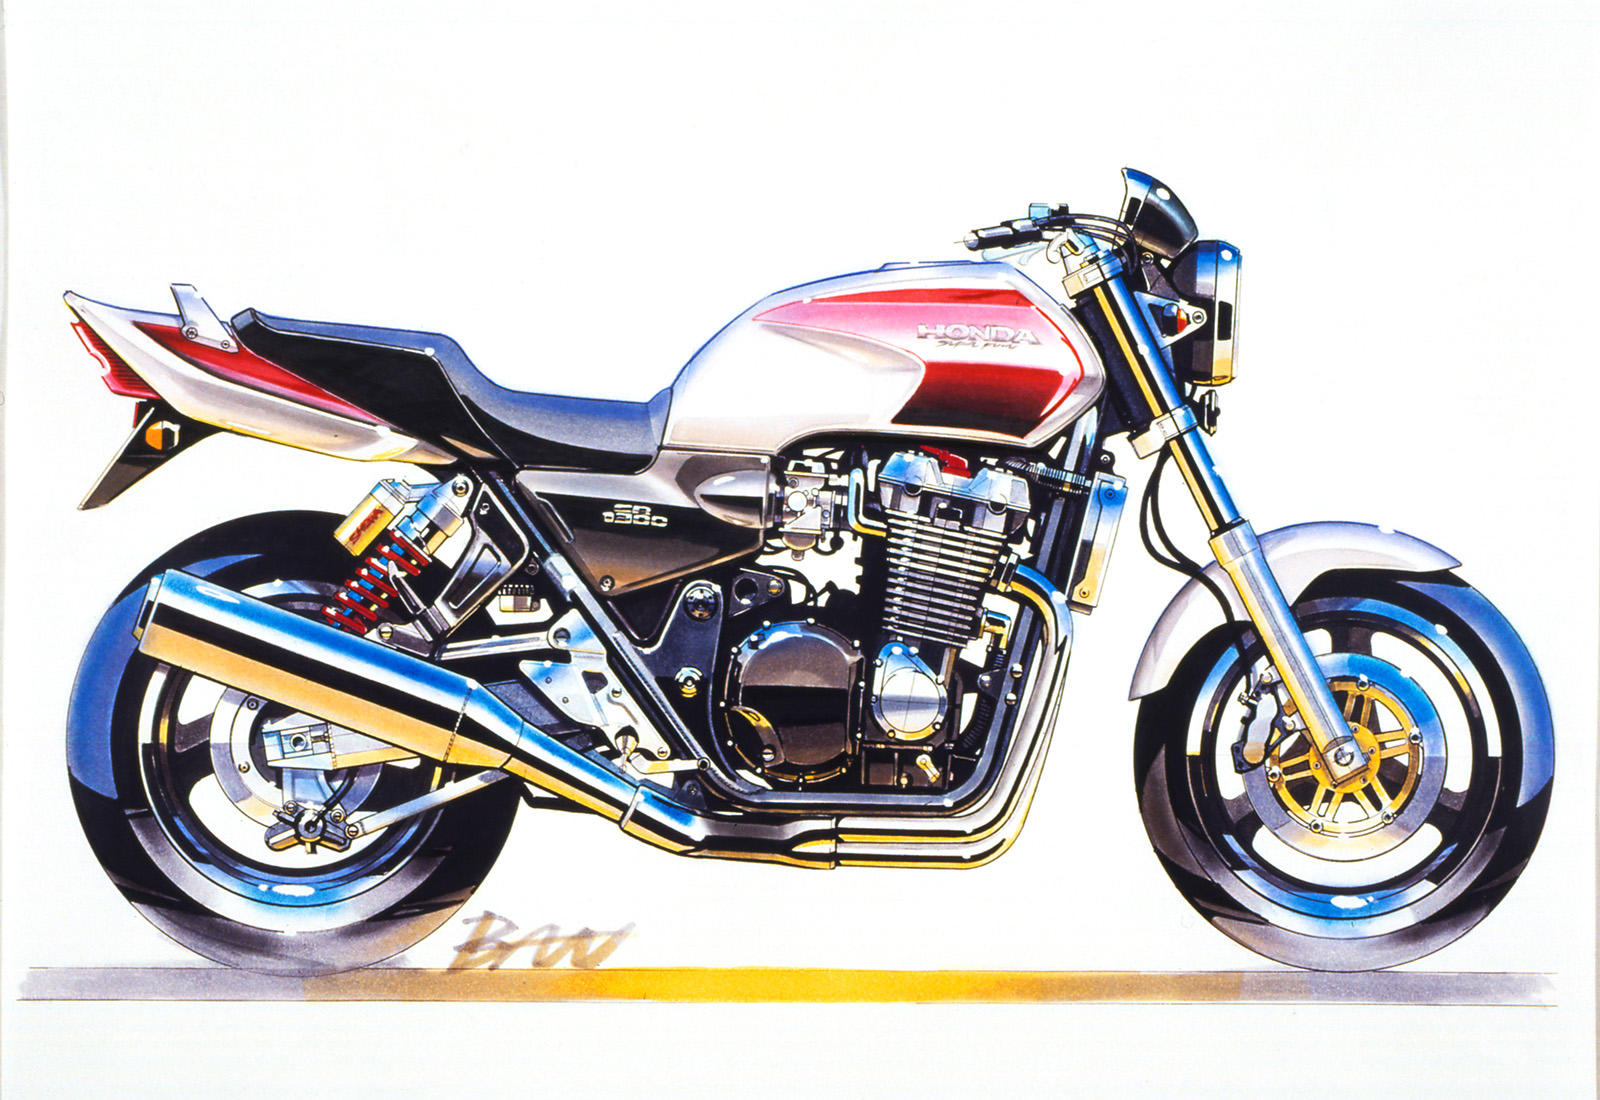 CB1300 SUPER FOUR[1998]final drawing